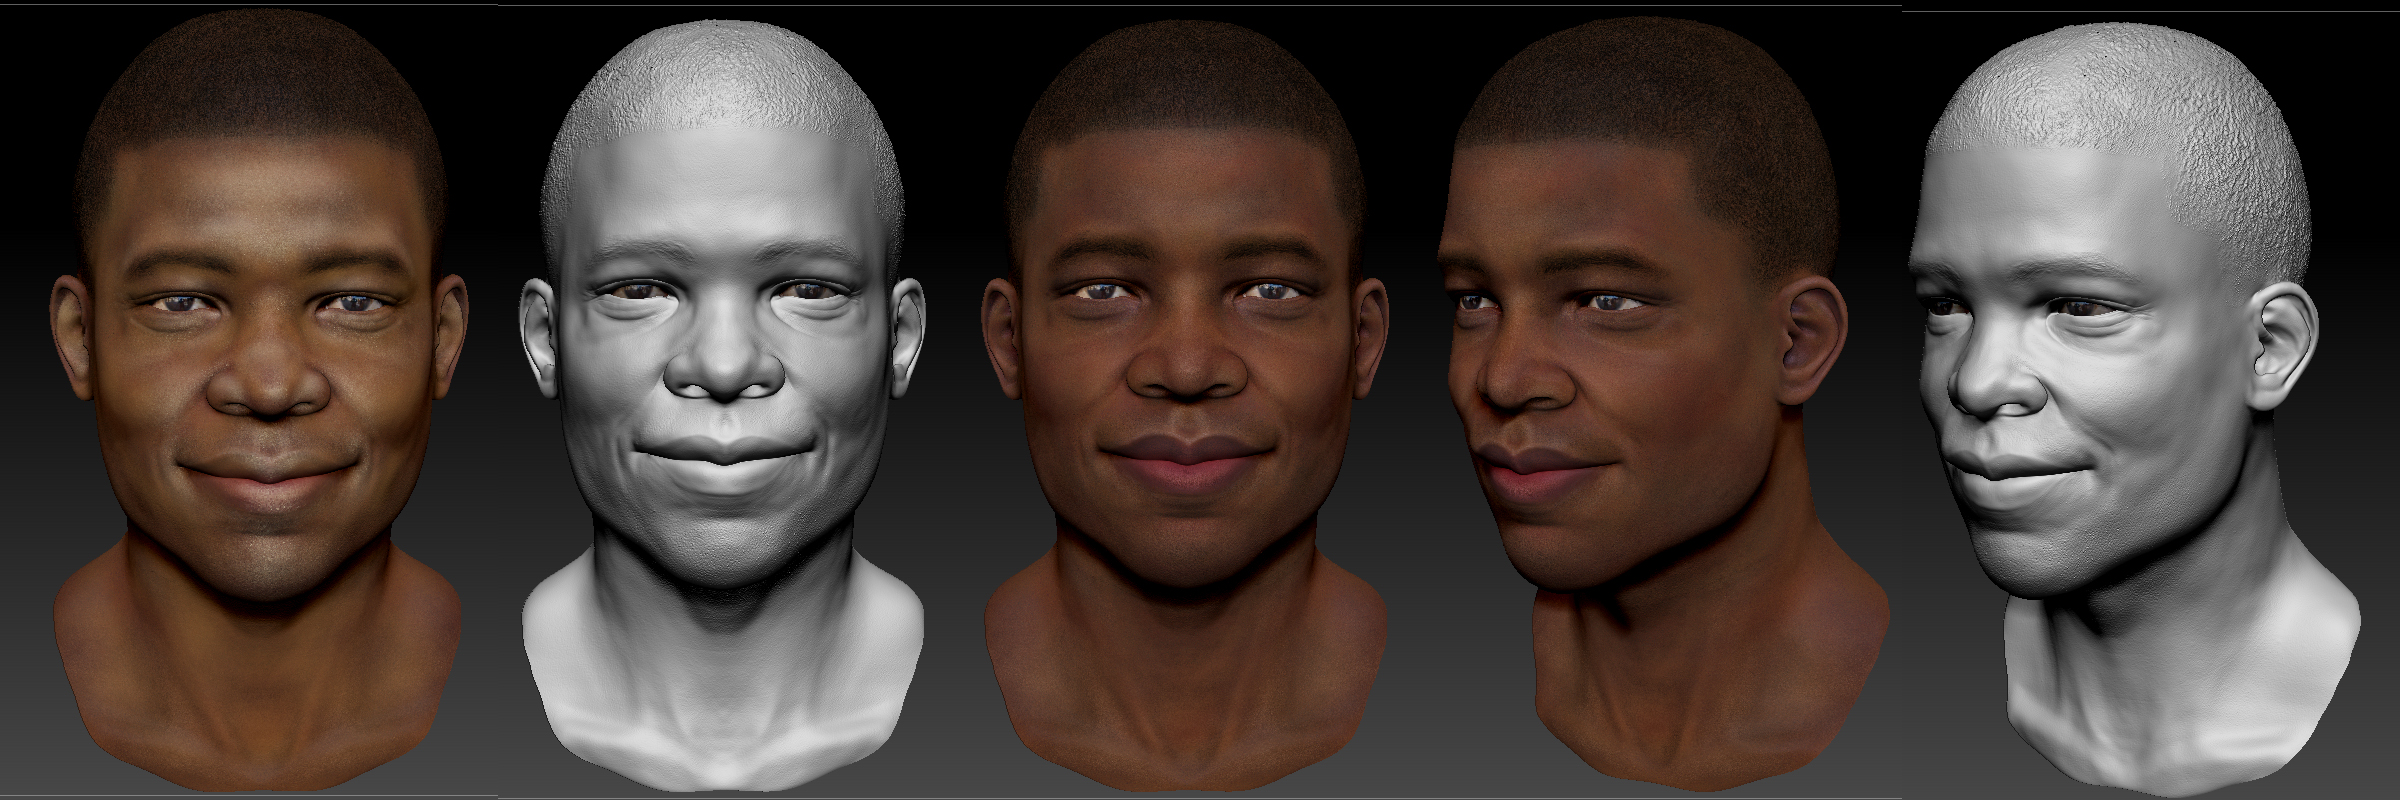 African American male head (smiling)